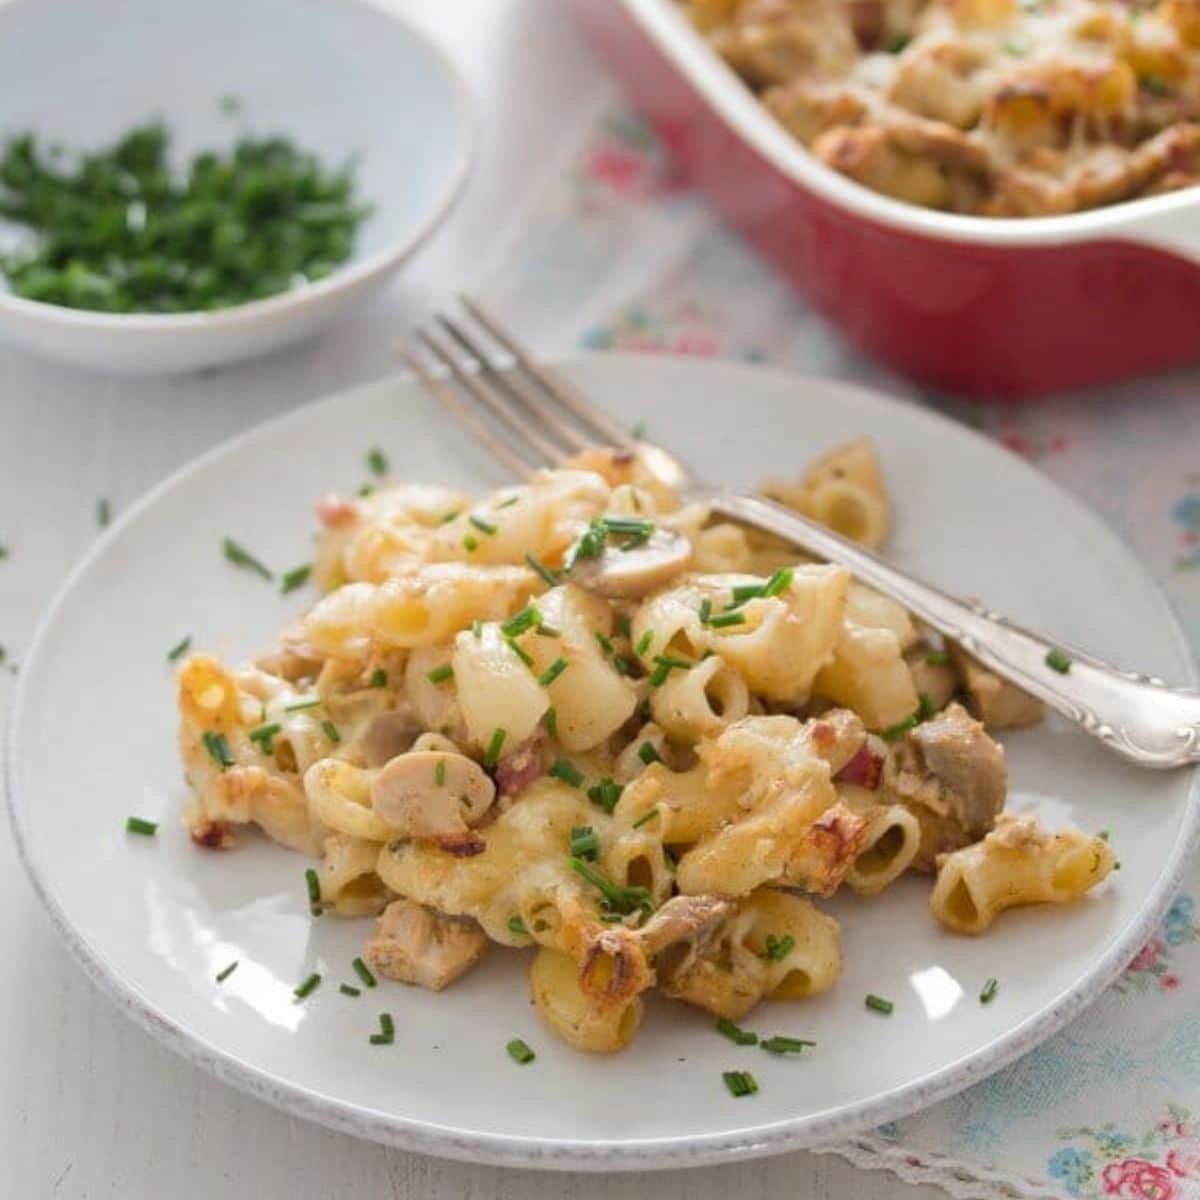 chicken, bacon and pasta bake on a small plate with a fork on it, a bowl of parsley behind it.